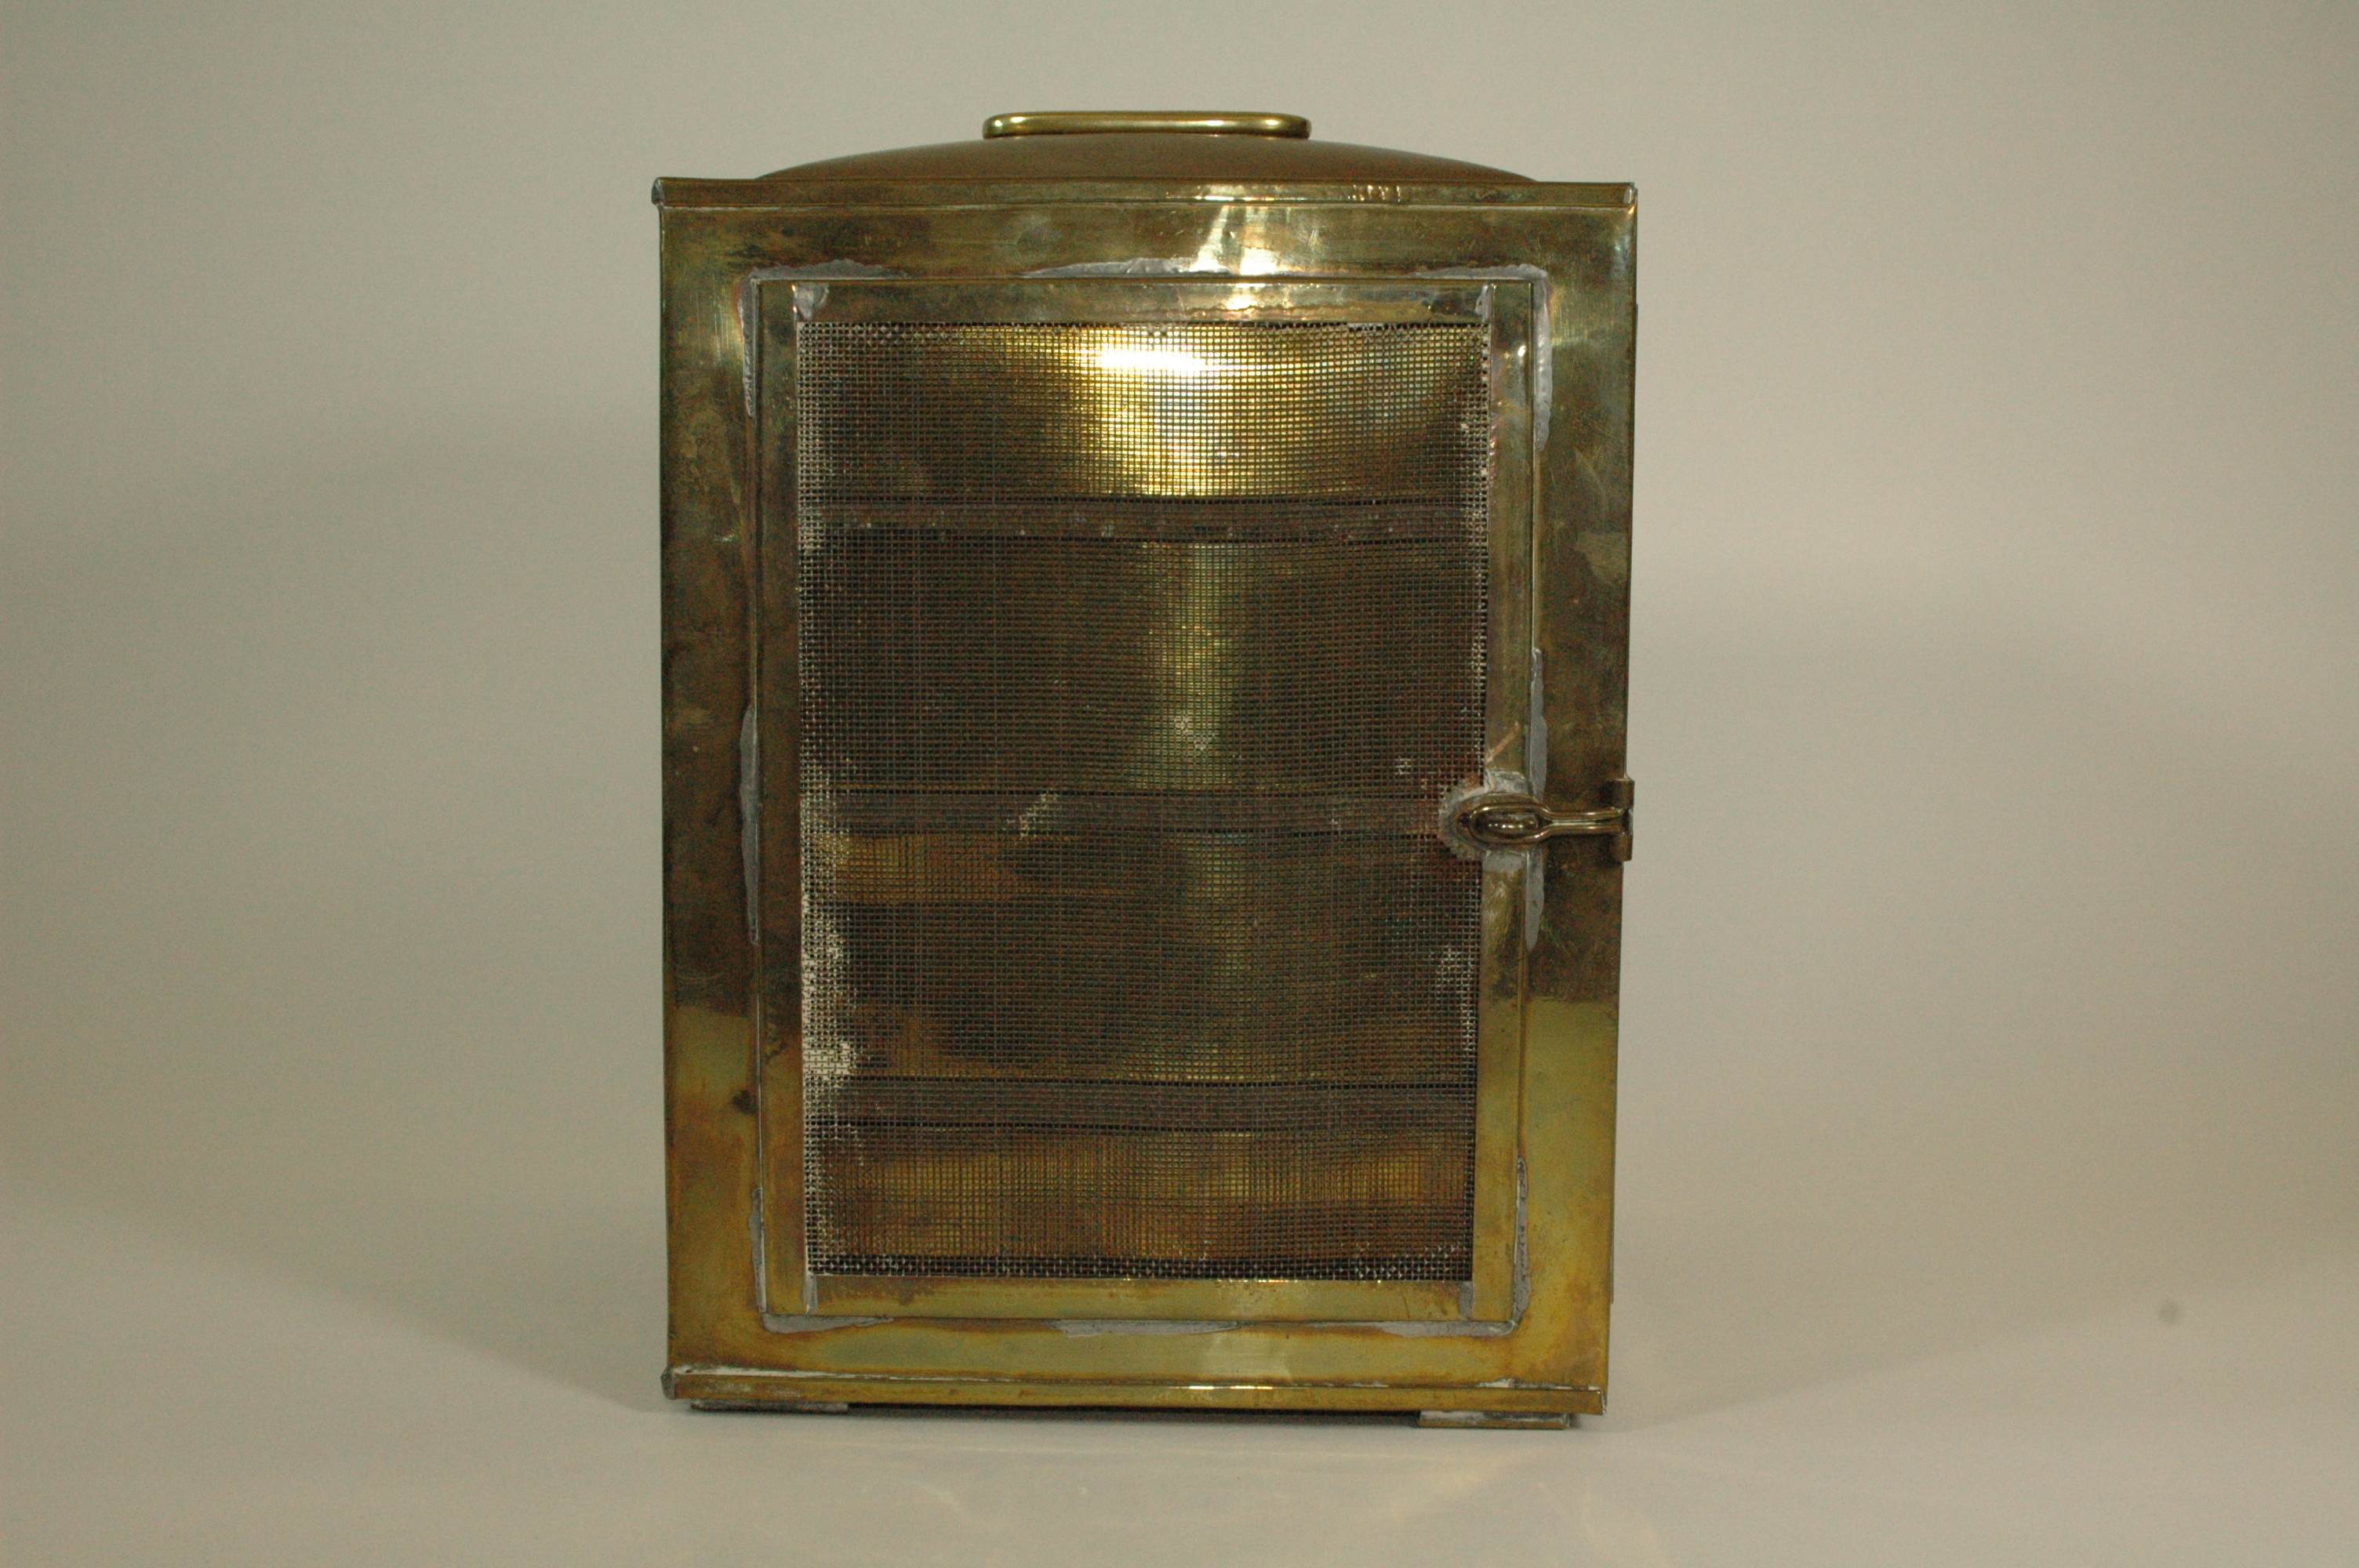 Rectangular tabletop sterilizer with mesh side panels. Brass body with handle on top. One door on front of unit with latch. Door opens to reveal four brass drawers, empty.